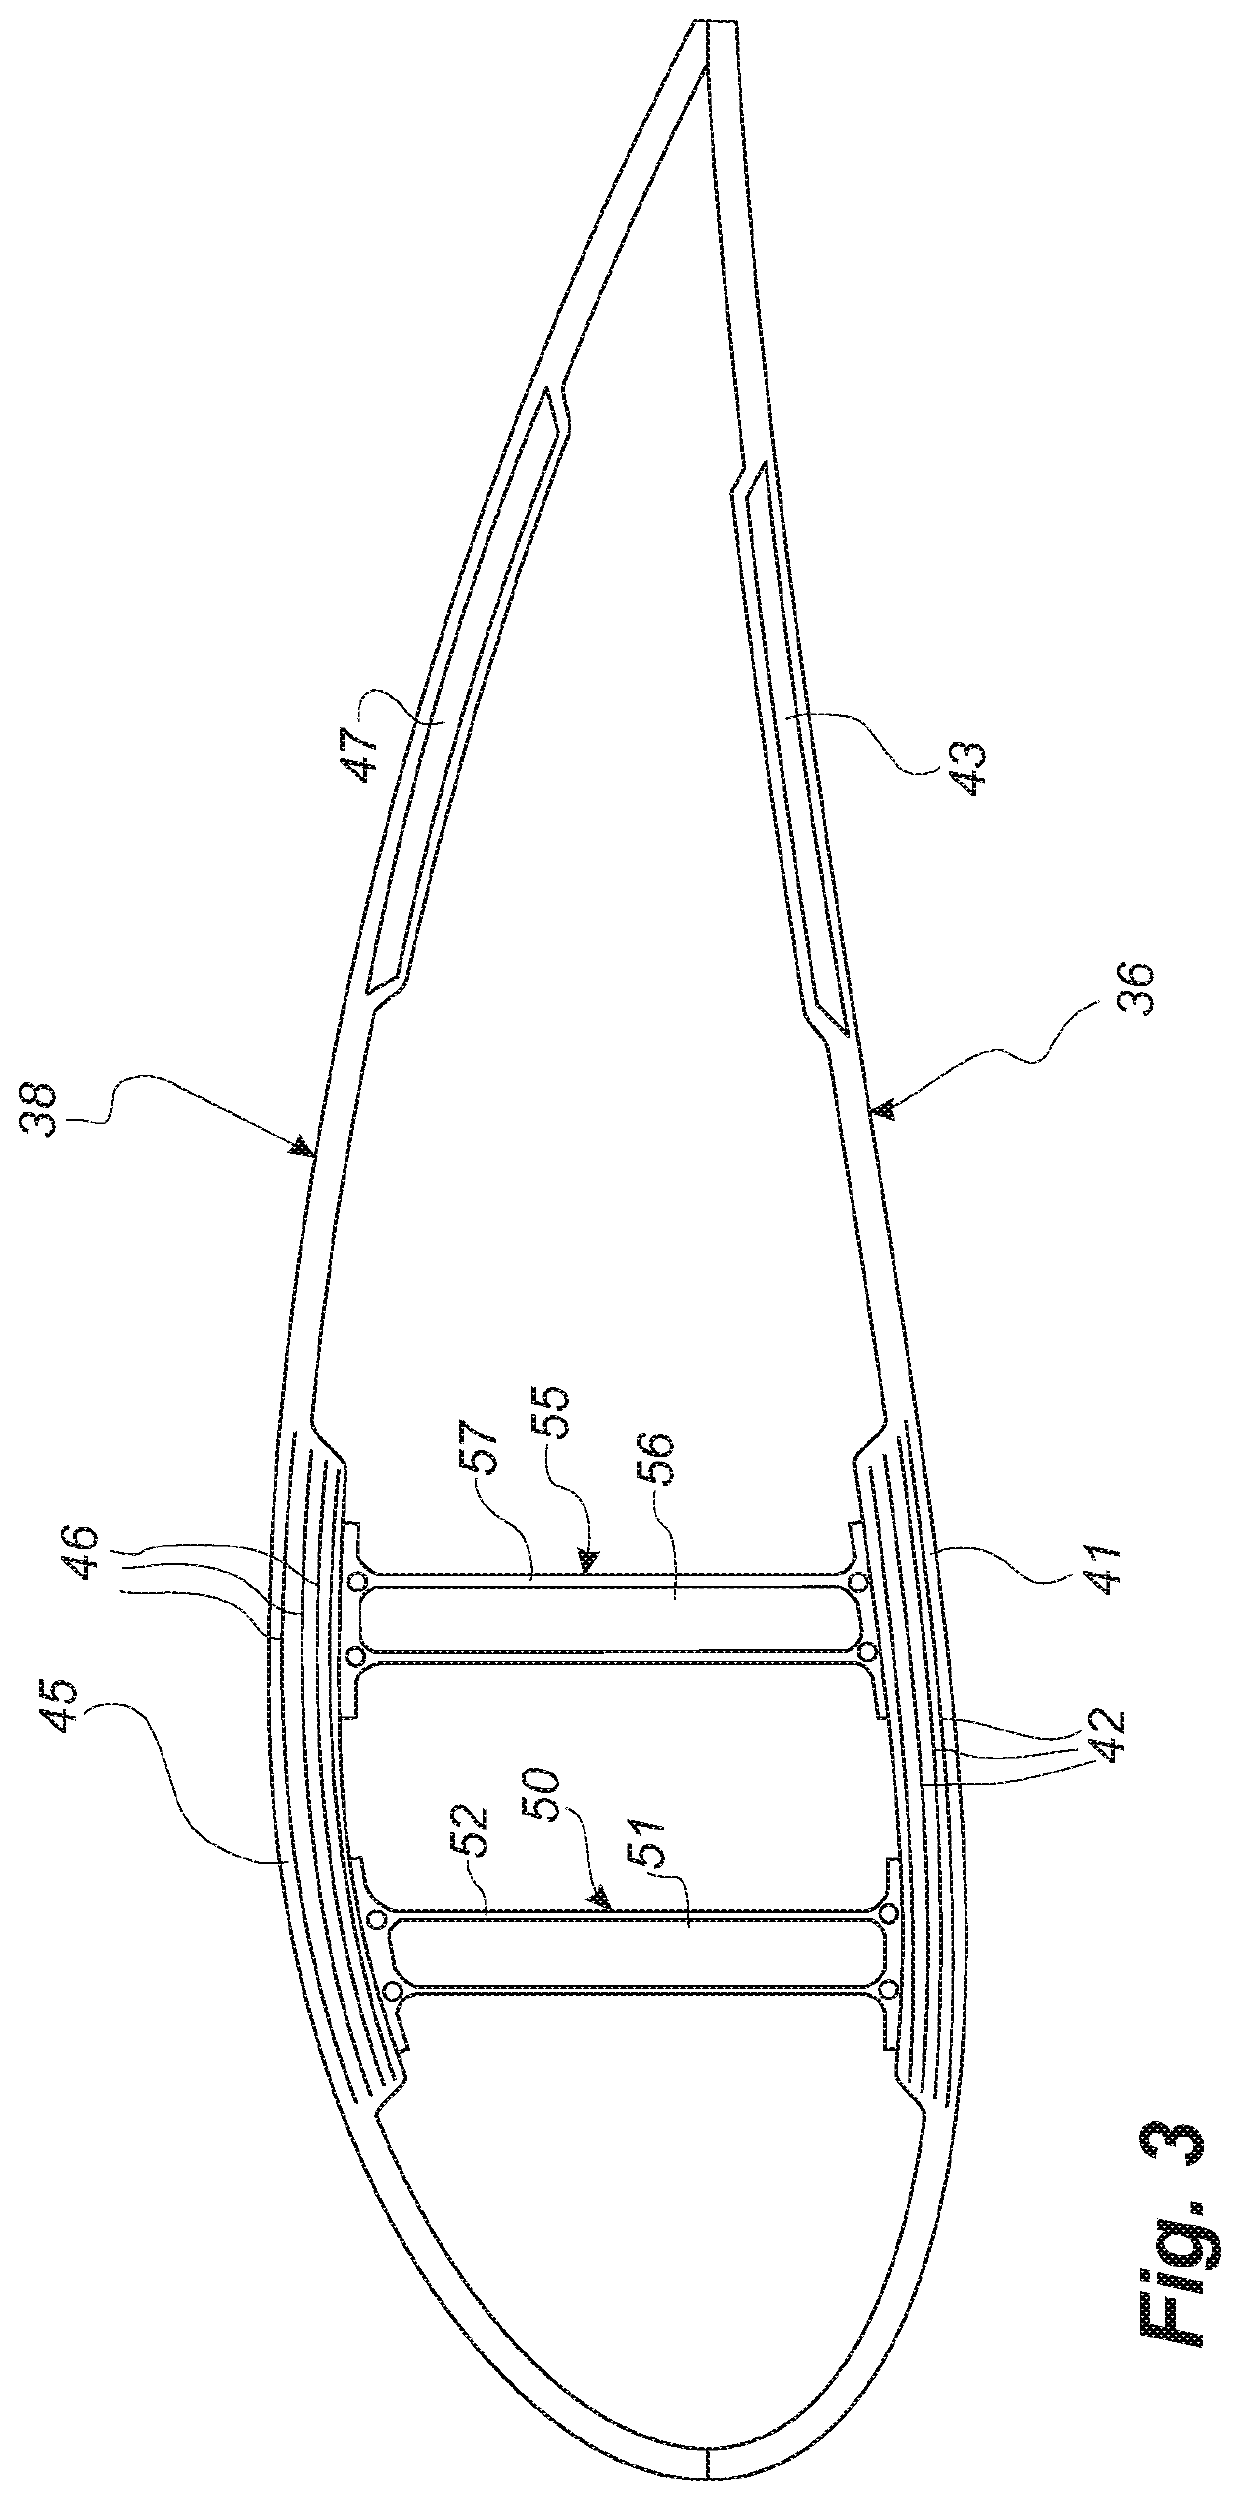 Method of manufacturing a composite laminate structure of a wind turbine blade part and related wind turbine blade part